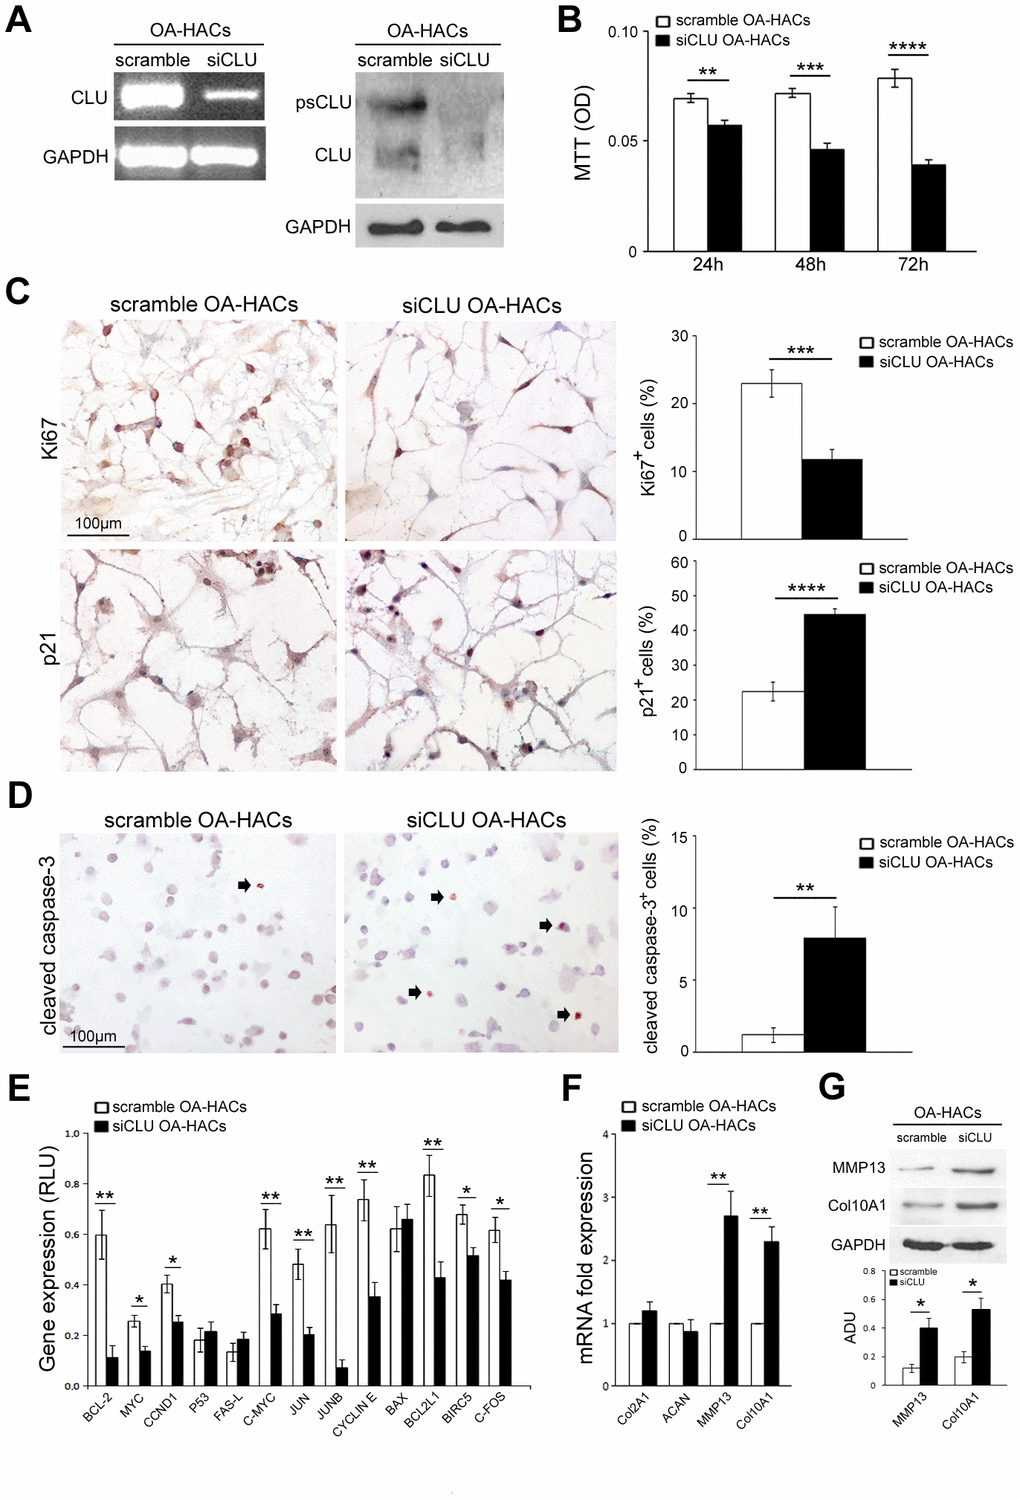 Effects of CLU silencing on viability, proliferation/death and differentiation of cultured OA chondrocytes. (A) CLU mRNA and protein expression after 48 and 72 hours, respectively, in scramble (control) and siCLU transfected OA-HACs. (B) Cell viability by MTT assay after 24, 48 and 72 hours of scramble and siCLU transfected OA-HACs. (C) Representative immunocytochemical images and bar graphs showing Ki67+ and p21+ nuclei in cultured OA-HACs and (D) cleaved caspase-3+ cytospinned OA-HACs after 72 hours of silencing. (E) Gene array shows the modulation of NFkB and Stat-3-related genes in siCLU transfected OA-HACs compared with scramble after 48 hours of silencing. Transcript levels were normalized on GAPDH (internal reference gene). (F) mRNA levels by Real-Time PCR of COL2A1, ACAN, MMP13, COL10A1, and (G) representative blot and densitometric analysis of MMP13 and COL10A1 in scramble and CLU-silenced OA-HACs. Data are expressed as mean values ± SEM of three independent experiments (each using pooled samples from n=3 OA donors) performed in triplicate. Abbreviations: OA-HACs, OA-Human articular chondrocytes; OD, optical density unit; RLU, relative light unit. Student’s t-test: *P P P P 